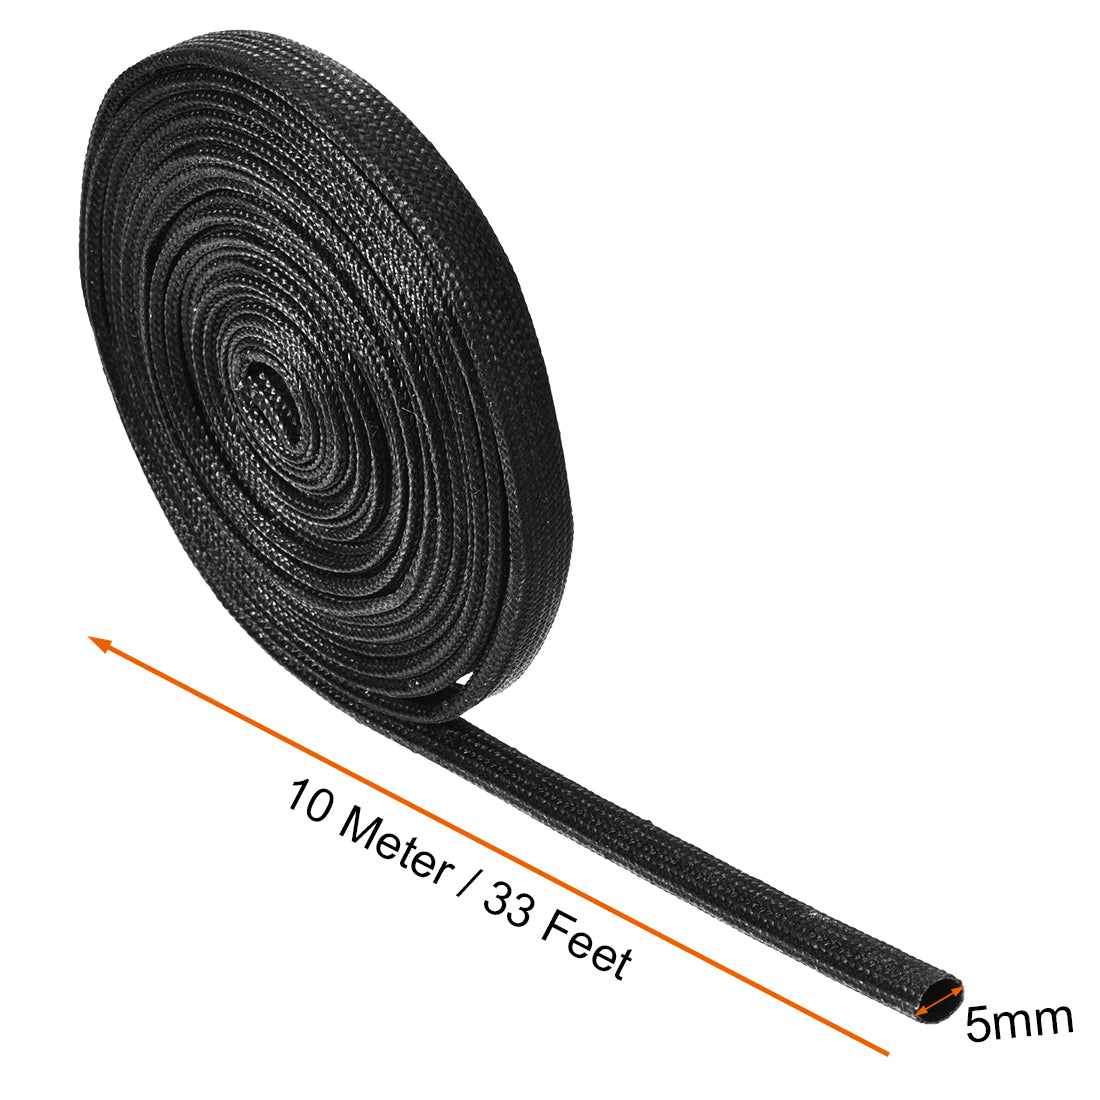 uxcell Uxcell Insulation Cable Protector, 33Ft-5mm High TEMP Silicone Fiberglass Sleeve Black